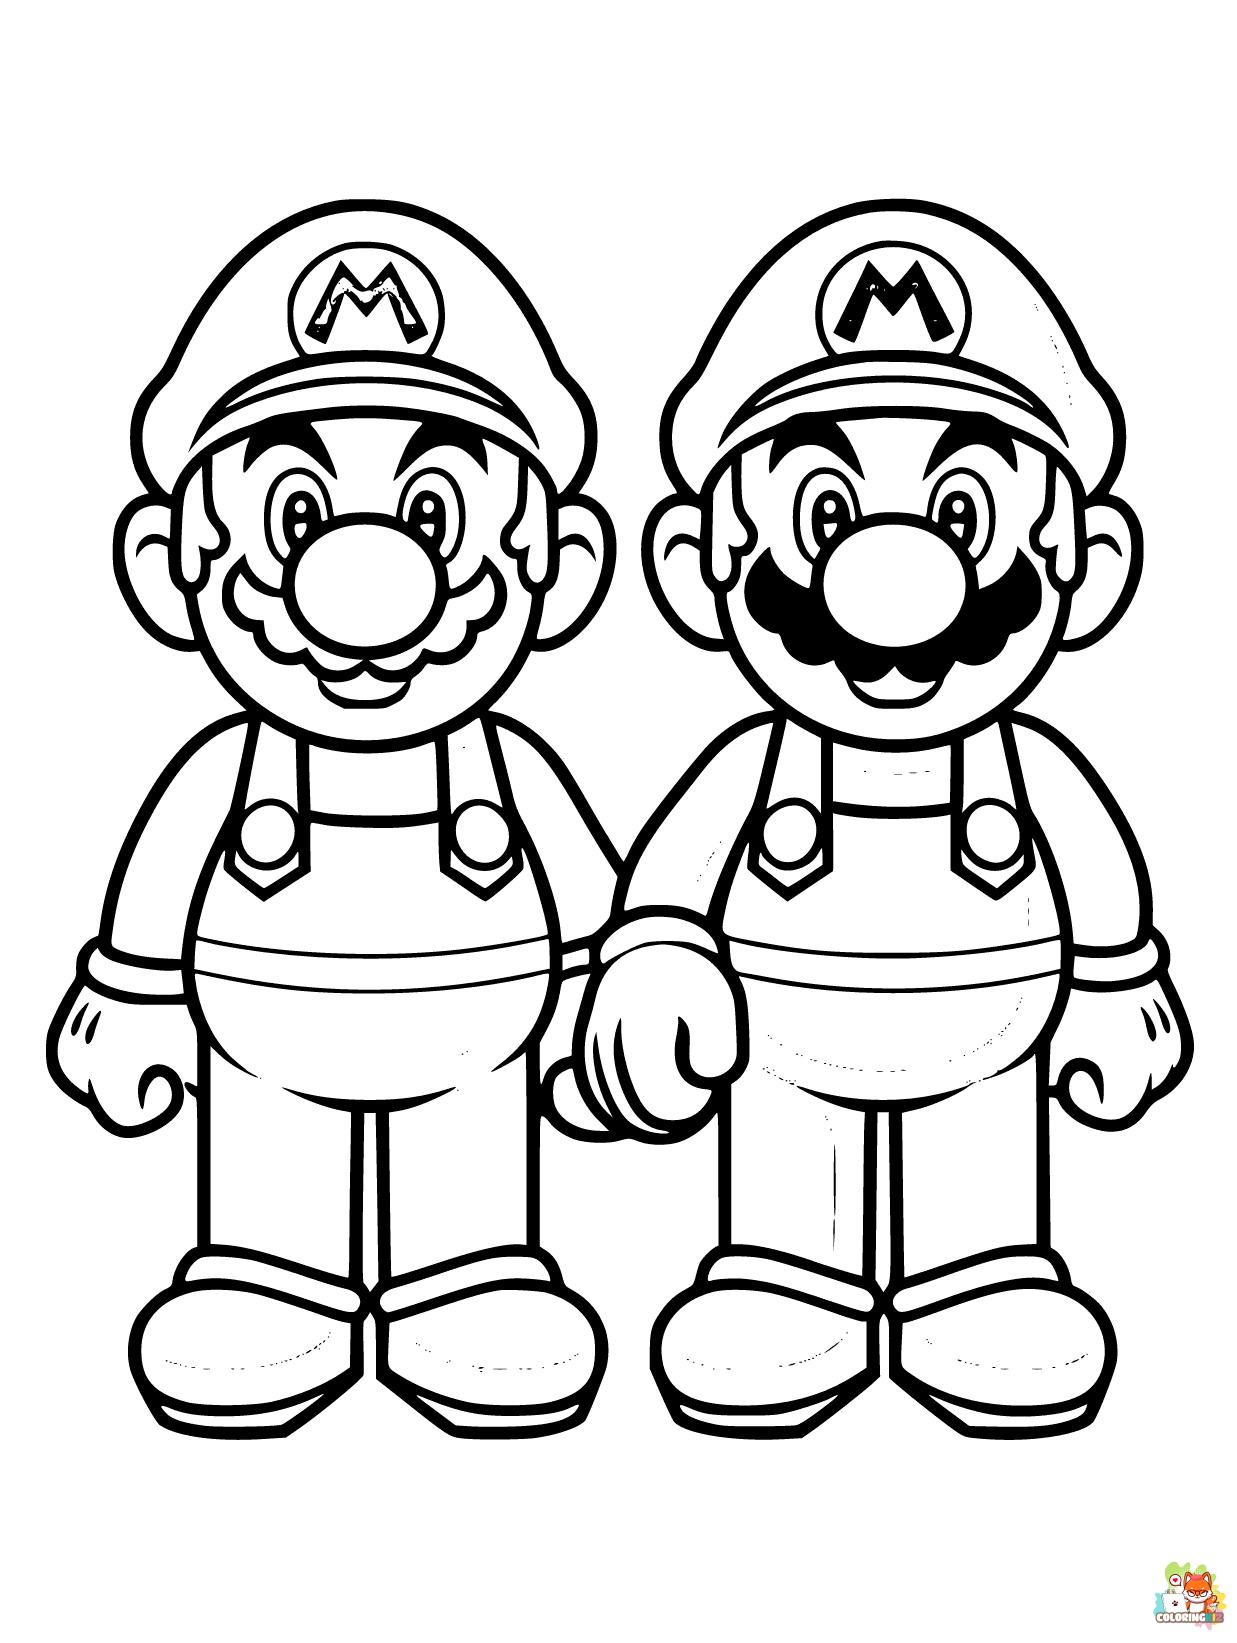 Mario and Luigi coloring pages 1